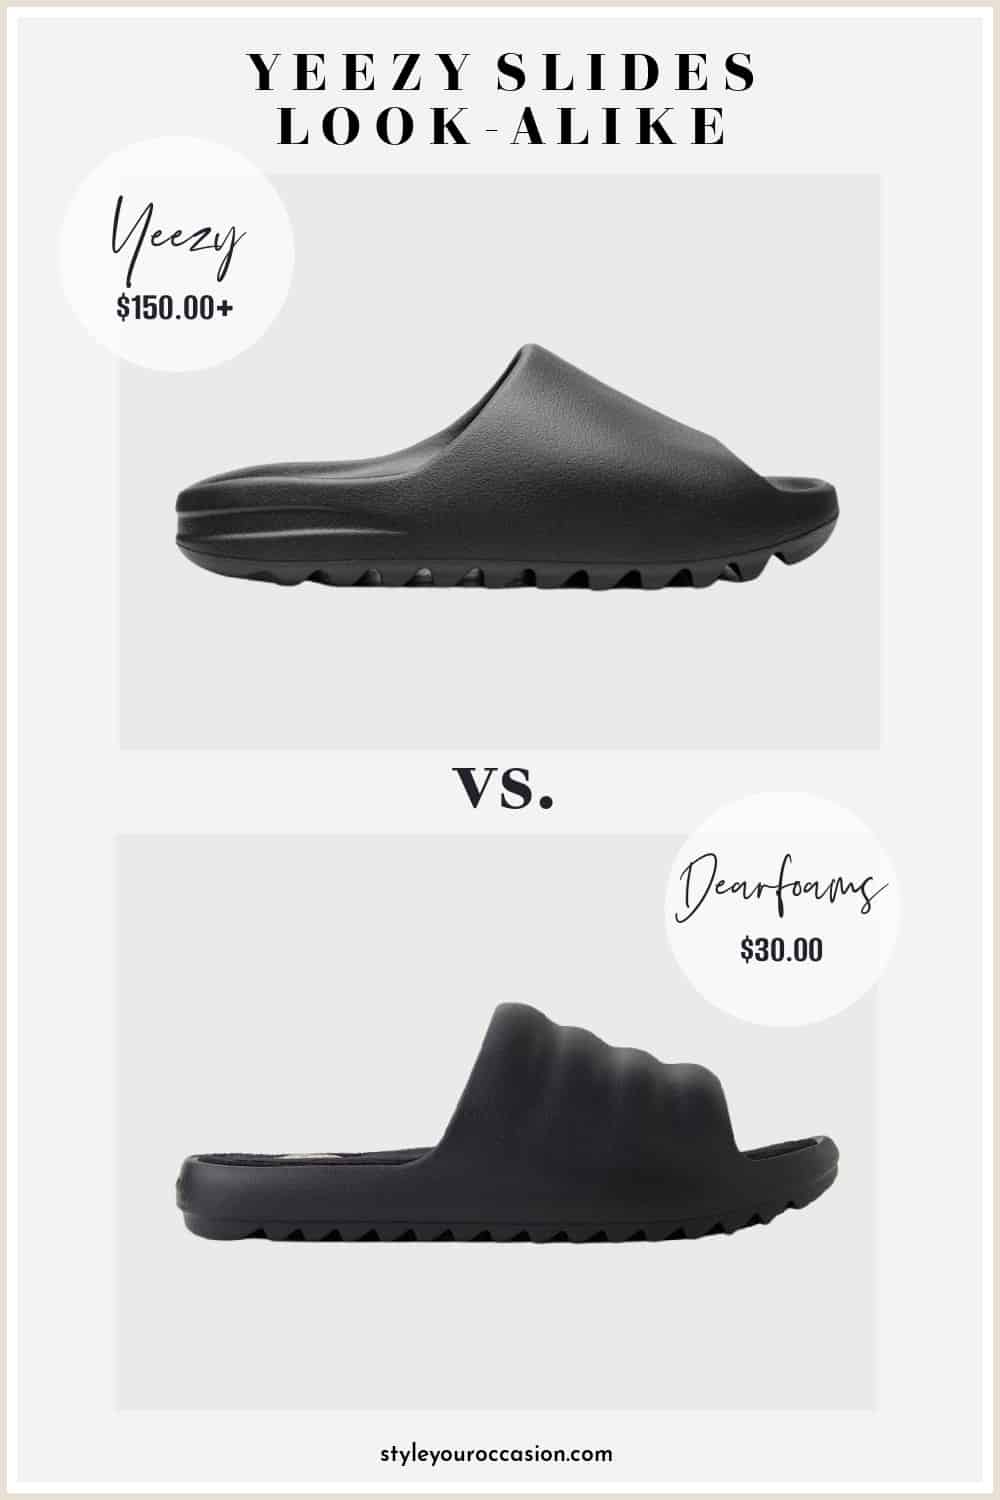 image comparing Yeezy slides in black to another pair of pillow slides that look similar